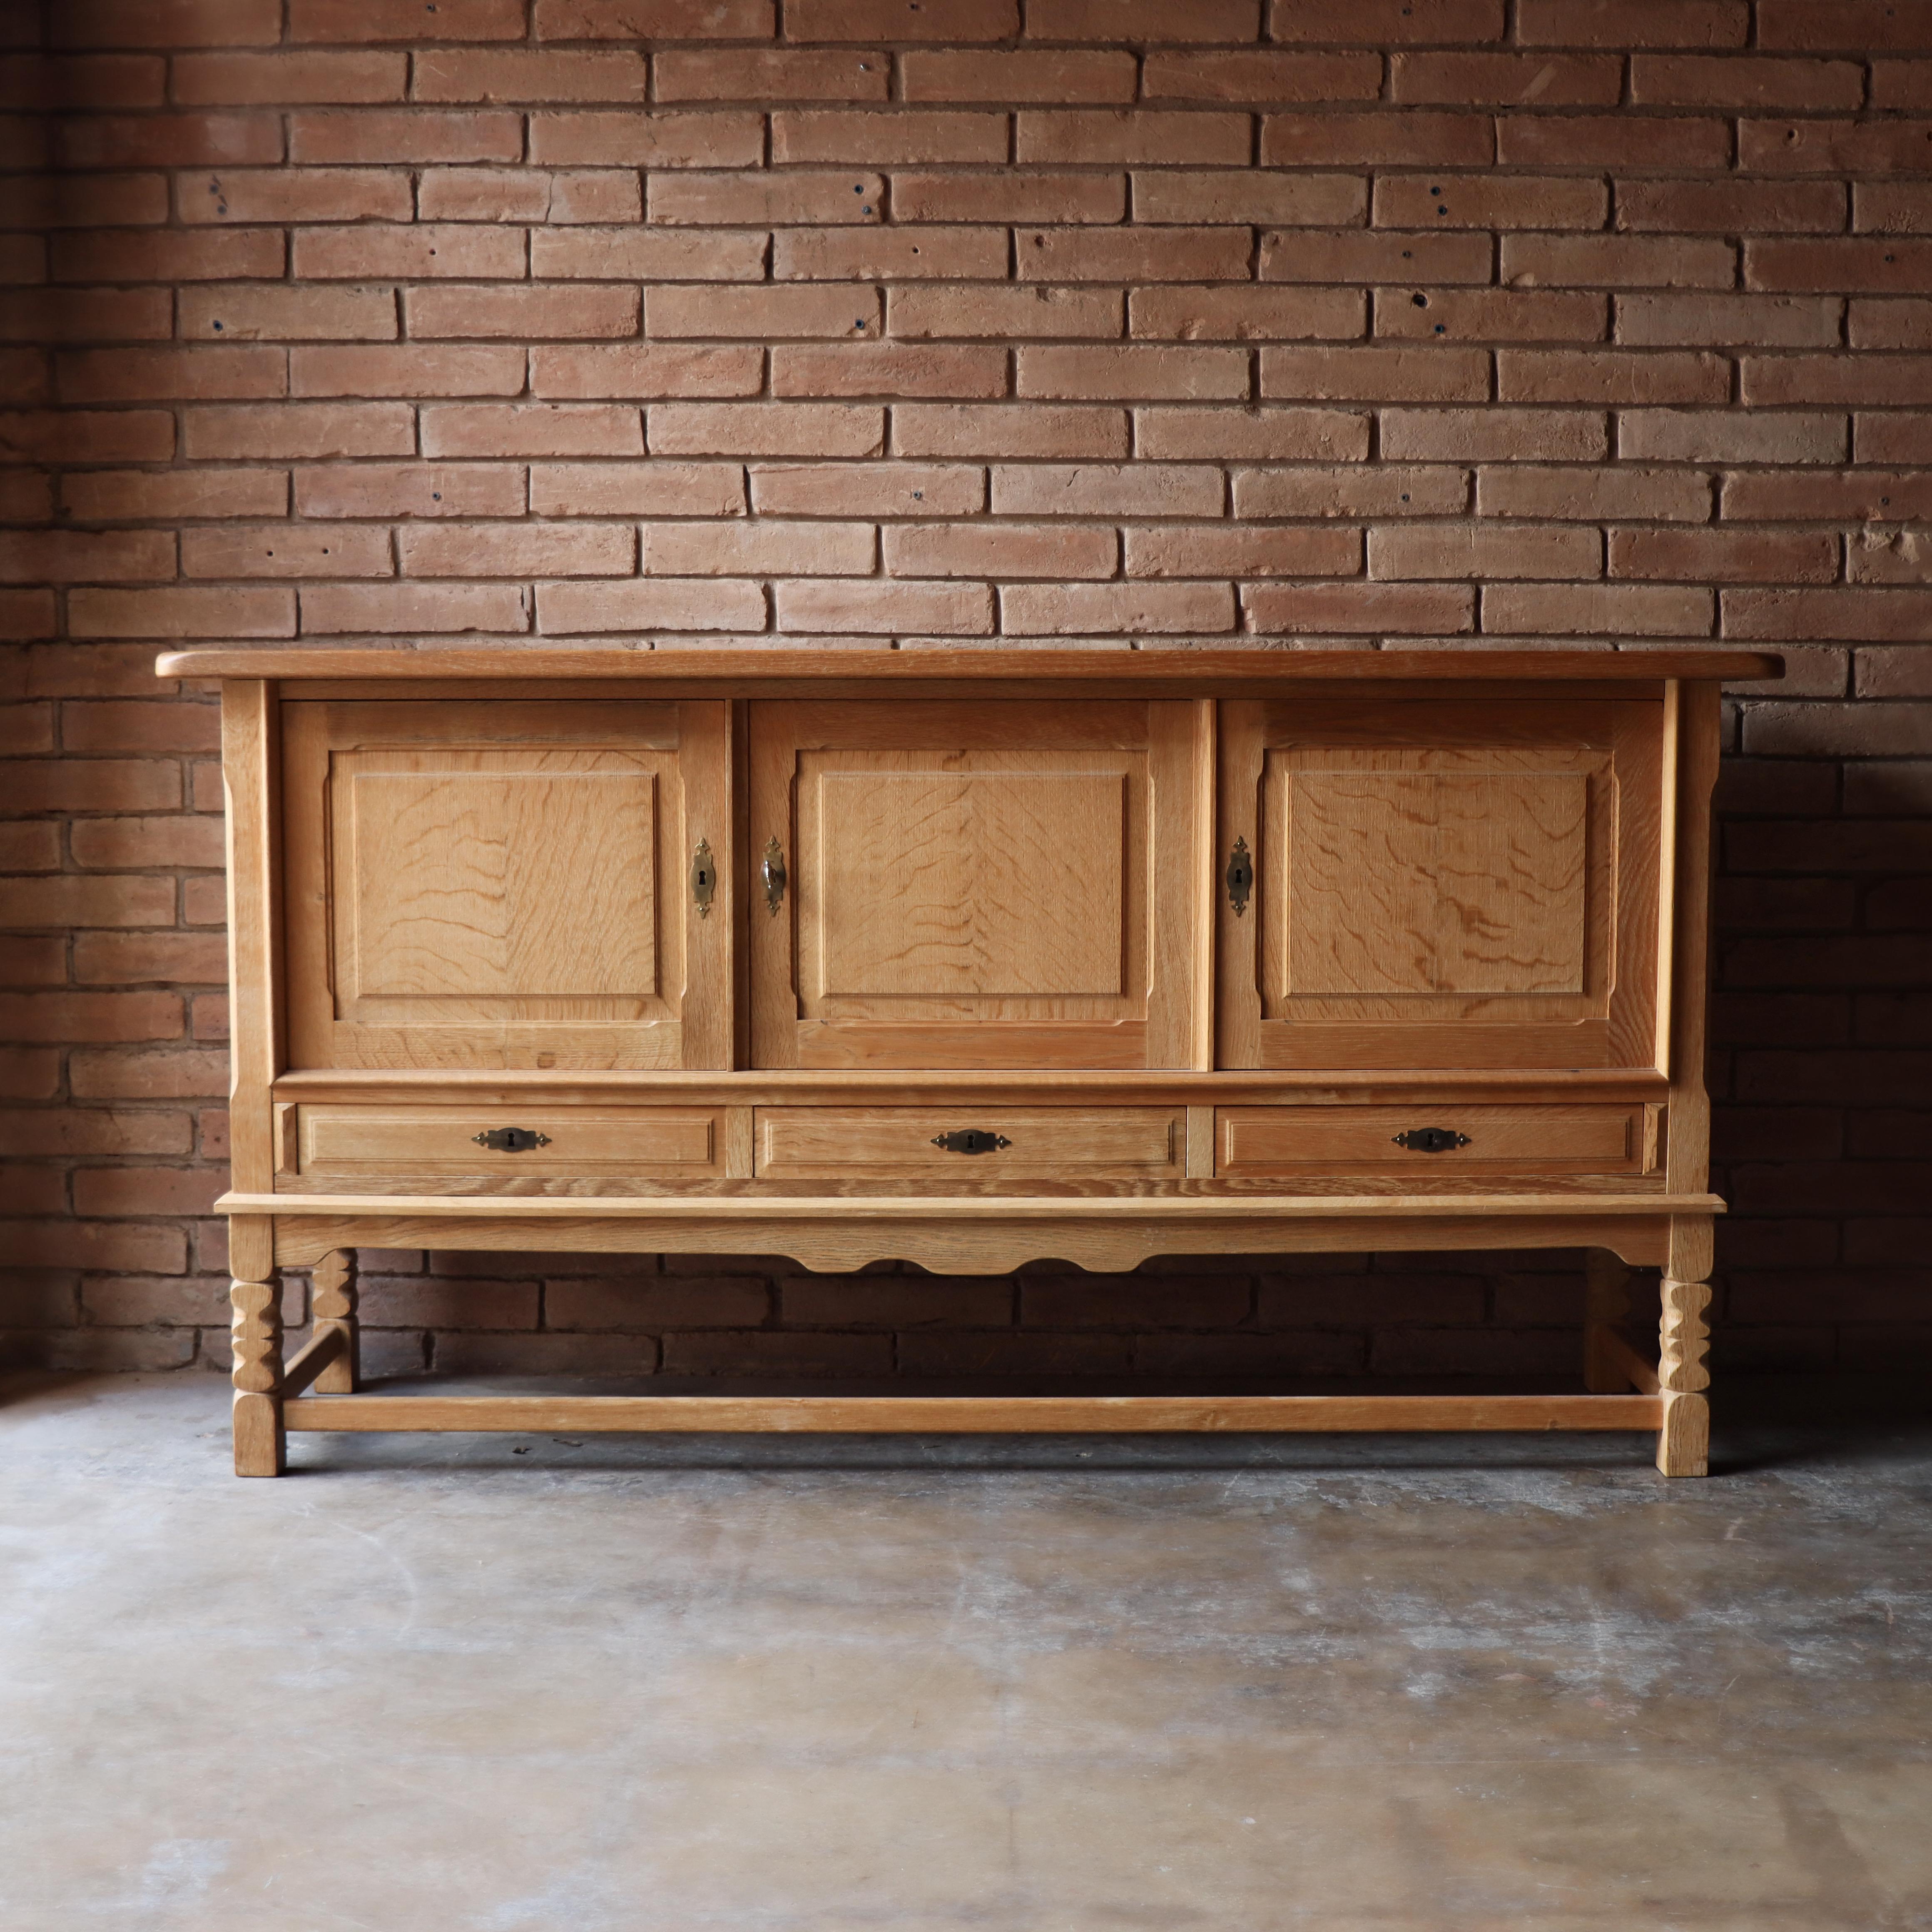 Beautiful solid oak sideboard/credenza attributed to Henning Kjærnulf, Denmark -1960s.  This beautiful example is constructed of nothing but solid quarter-sewn white oak. The cabinet front features excellent attention to refined details. 

This